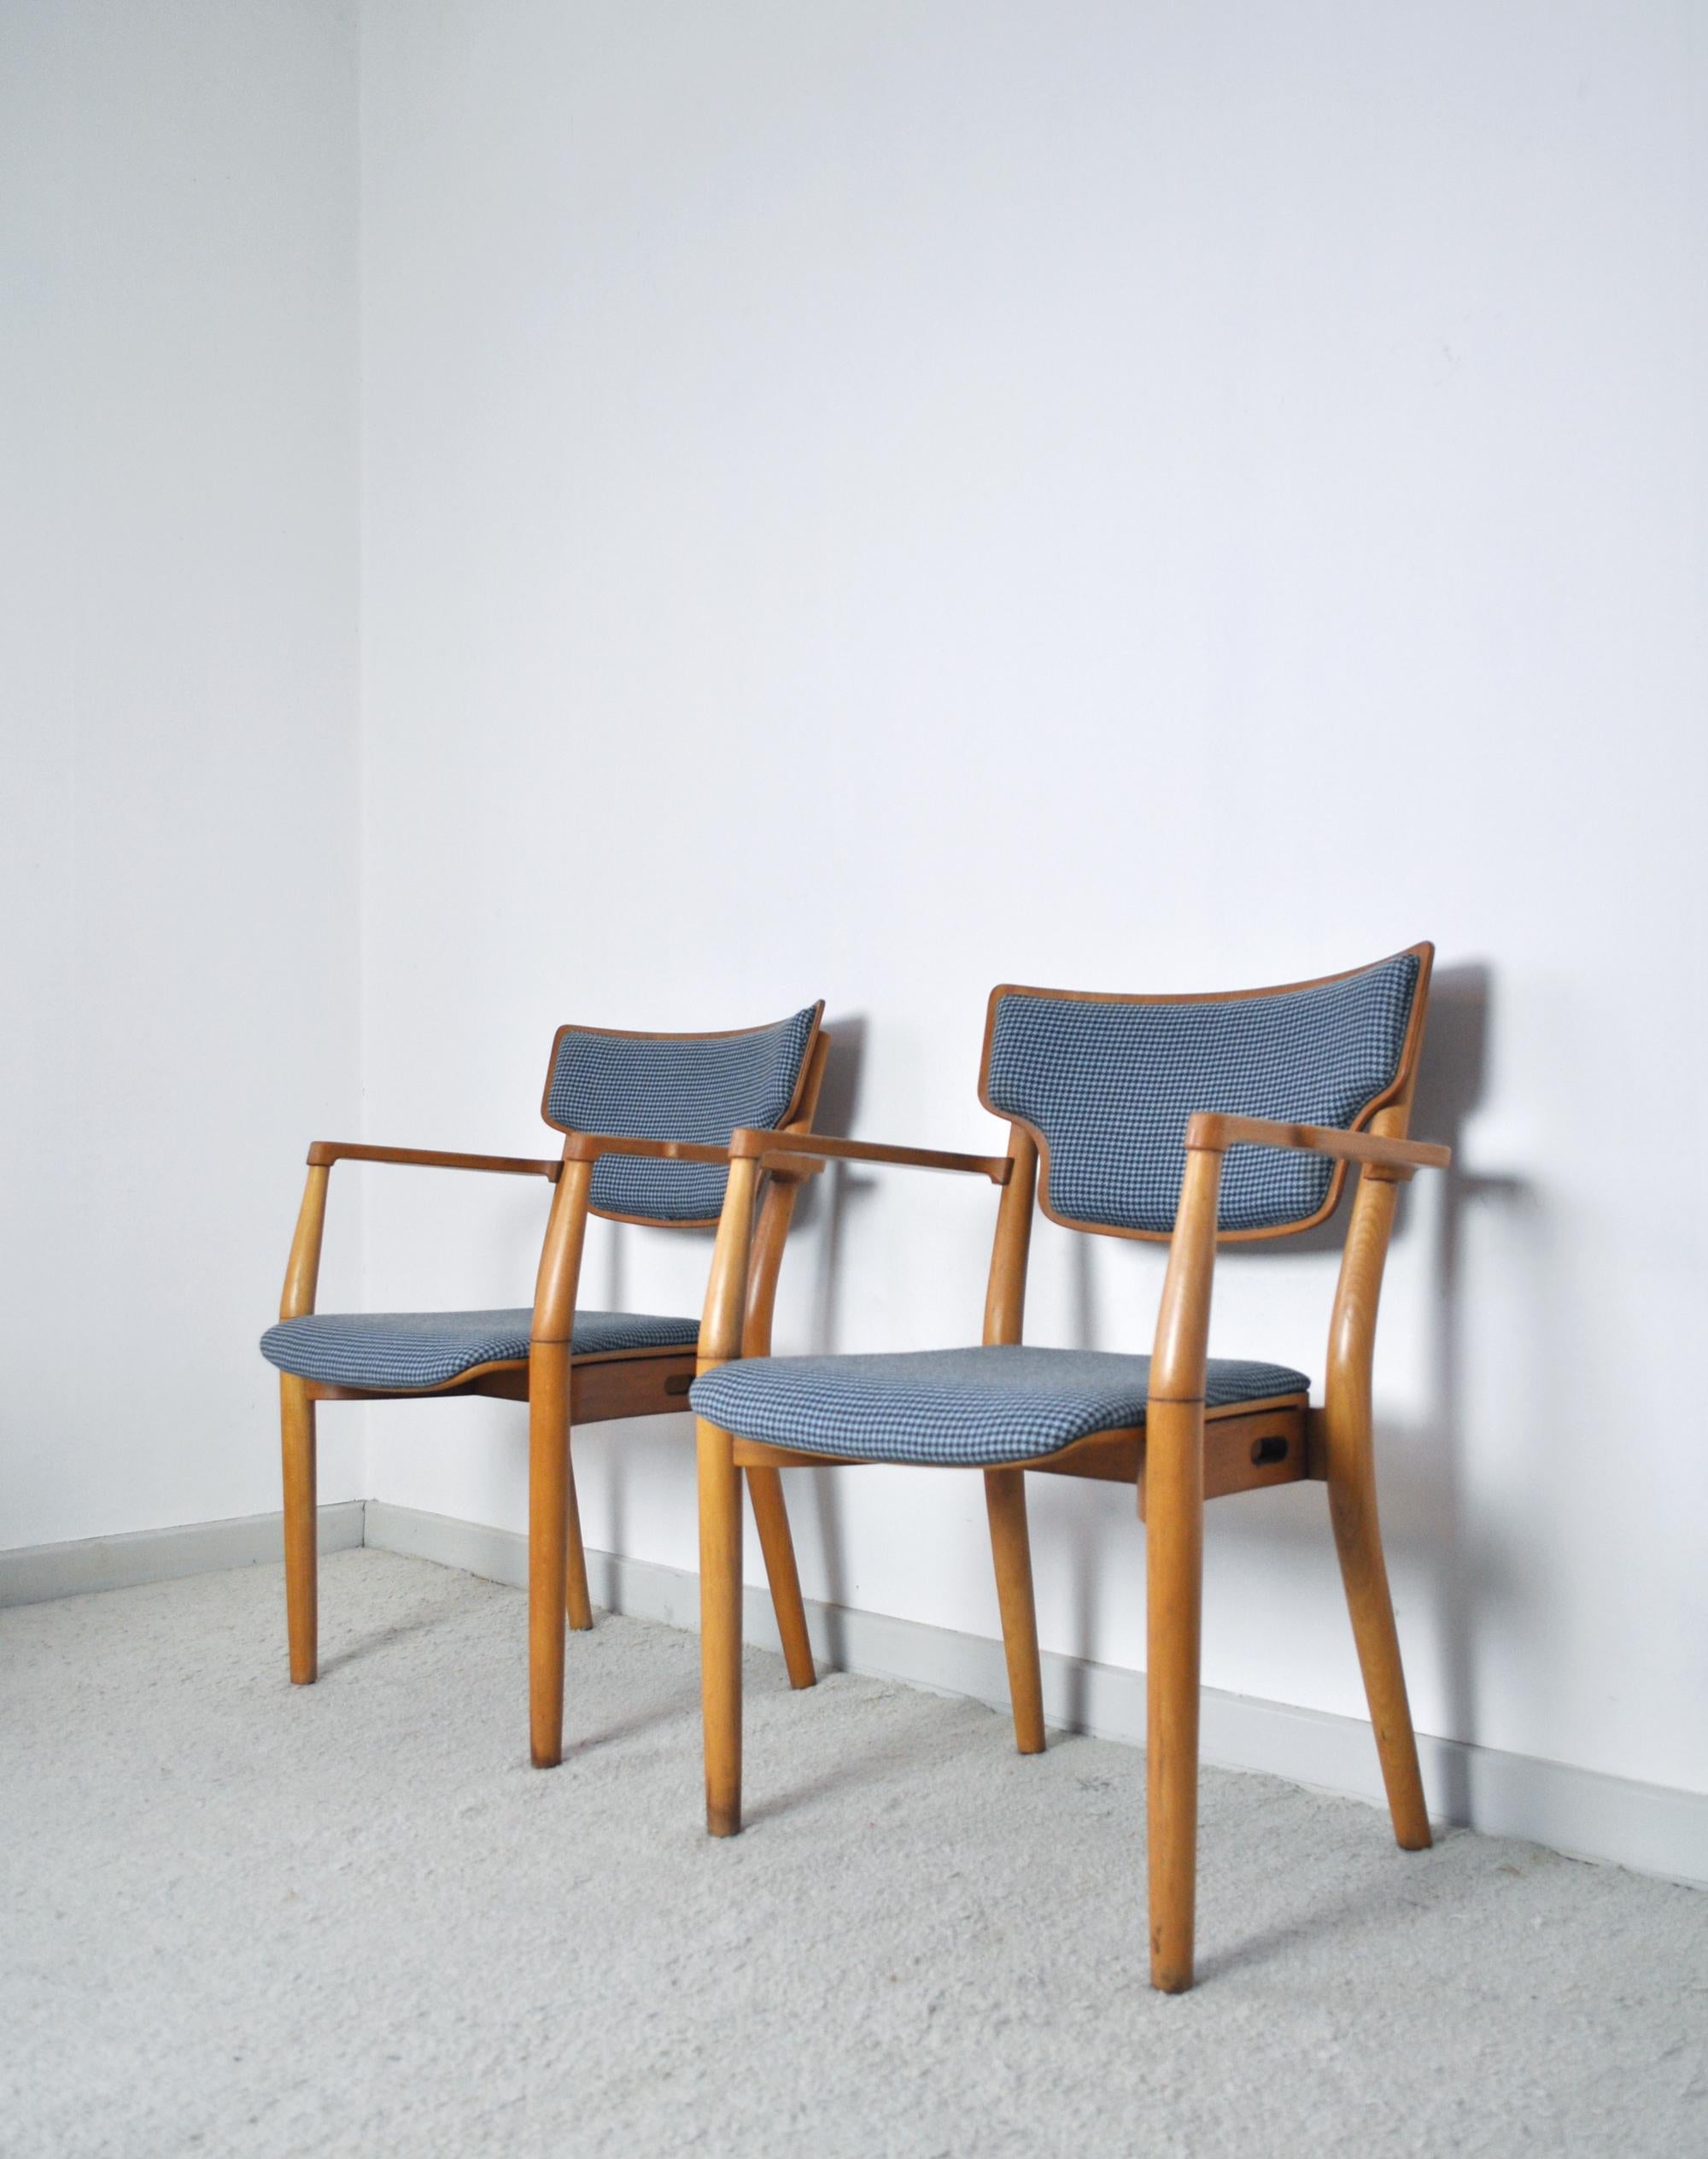 Rare pair of Portex armchairs designed by Peter Hvidt & Orla Mølgaard-Nielsen and produced by Fritz Hansen, circa 1940. New upholstery, frame made of beech.
The Portex series was mainly exported to the American occupation forces in Germany.
This